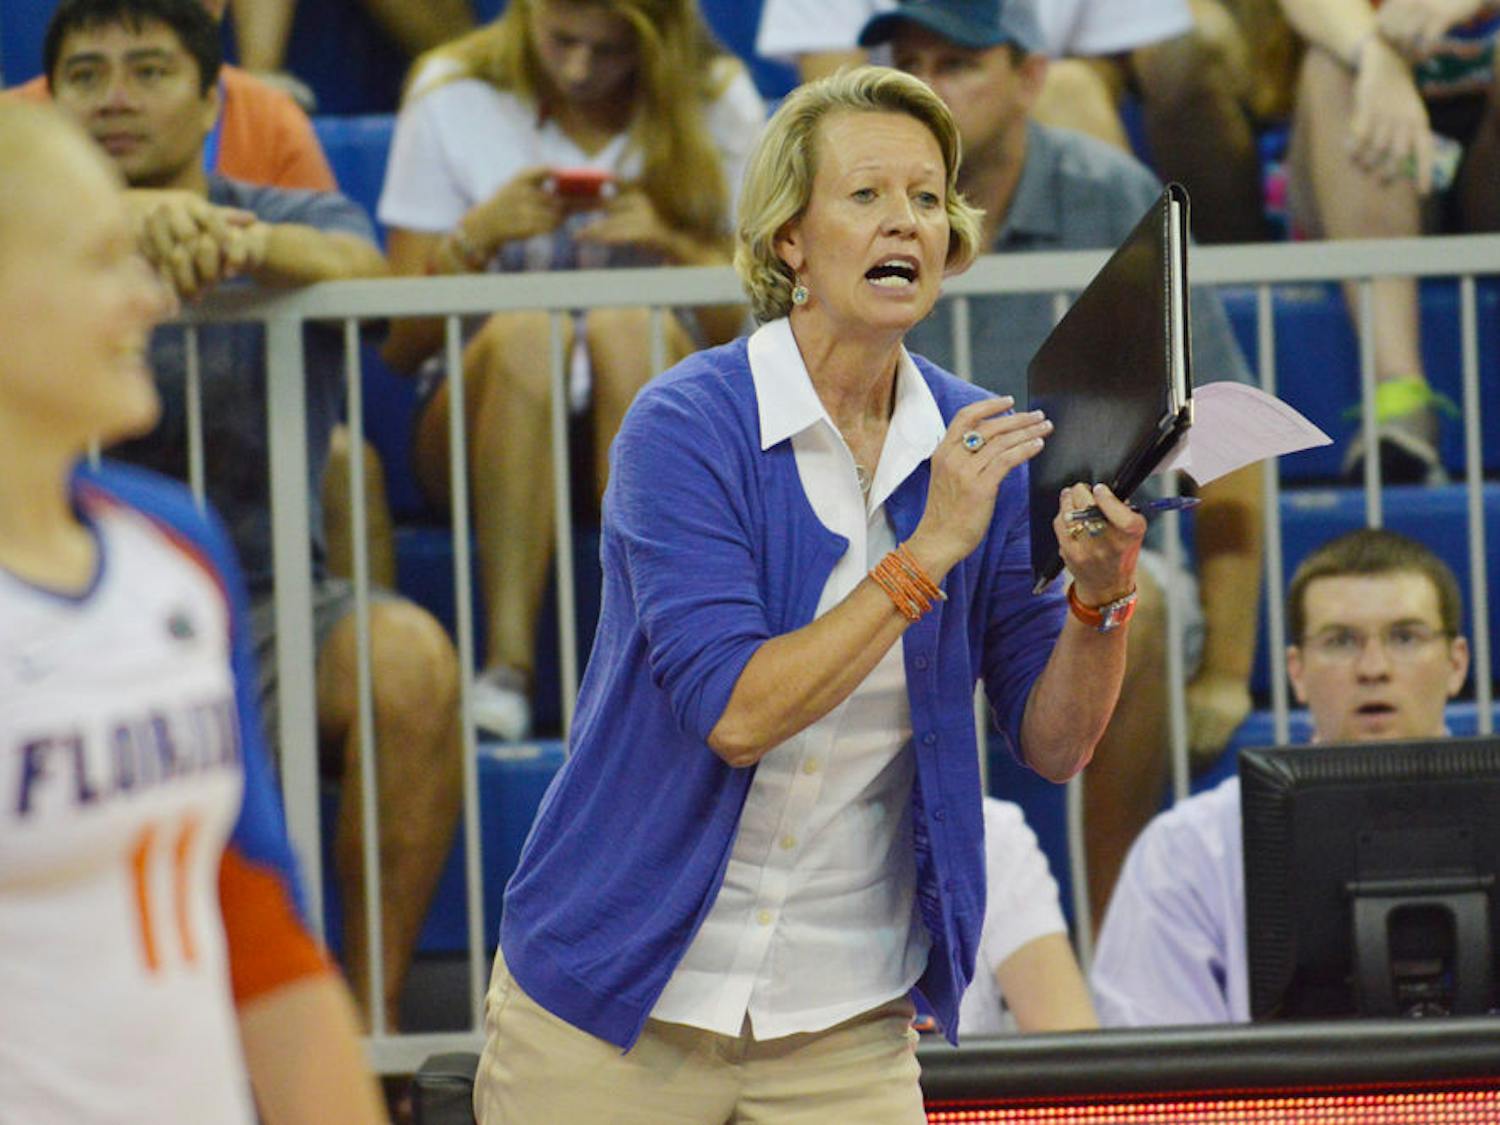 UF coach Mary Wise calls out a play during Florida's 3-2 win against Oklahoma on Aug. 30 in the O'Connell Center.